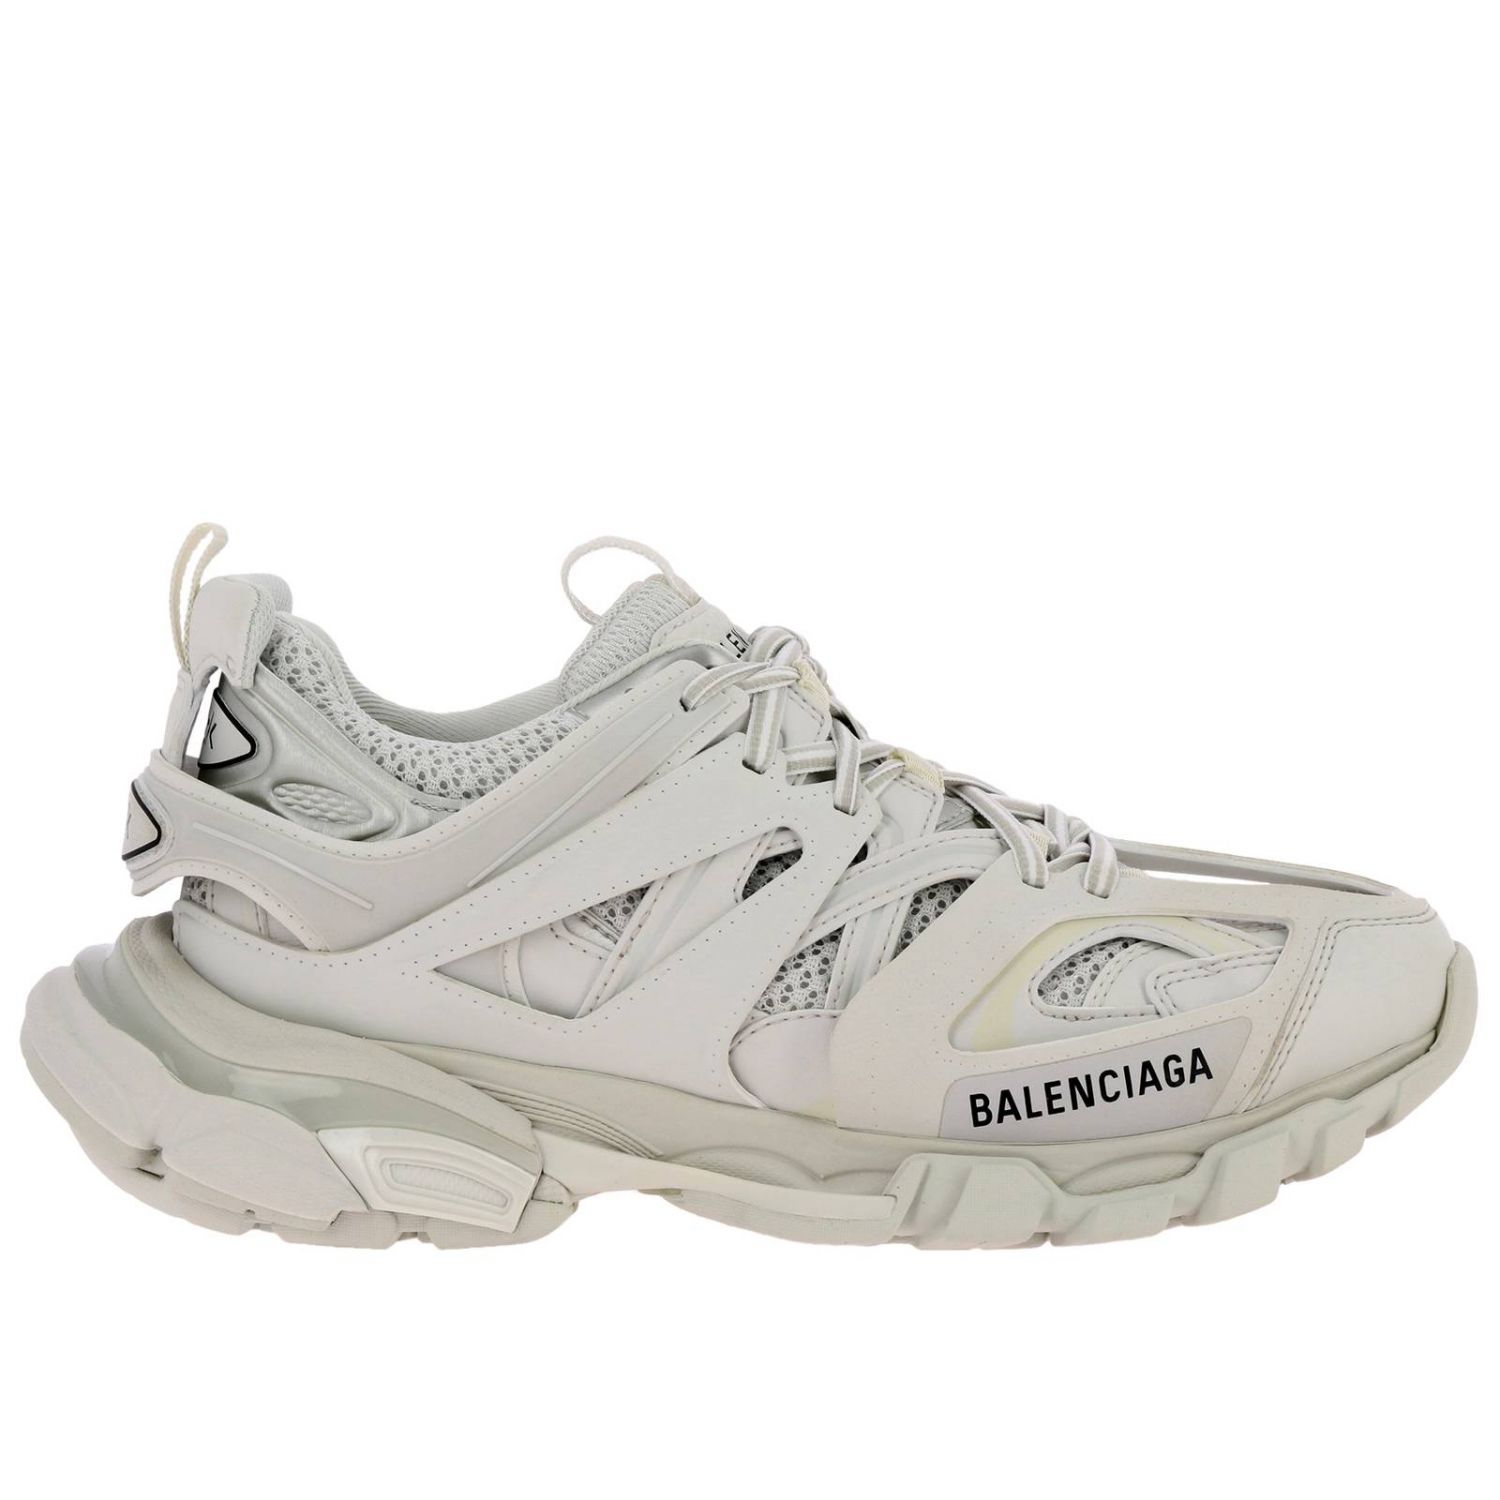 BALENCIAGA: Truck sneakers in leather and micro-mesh with oversized ...